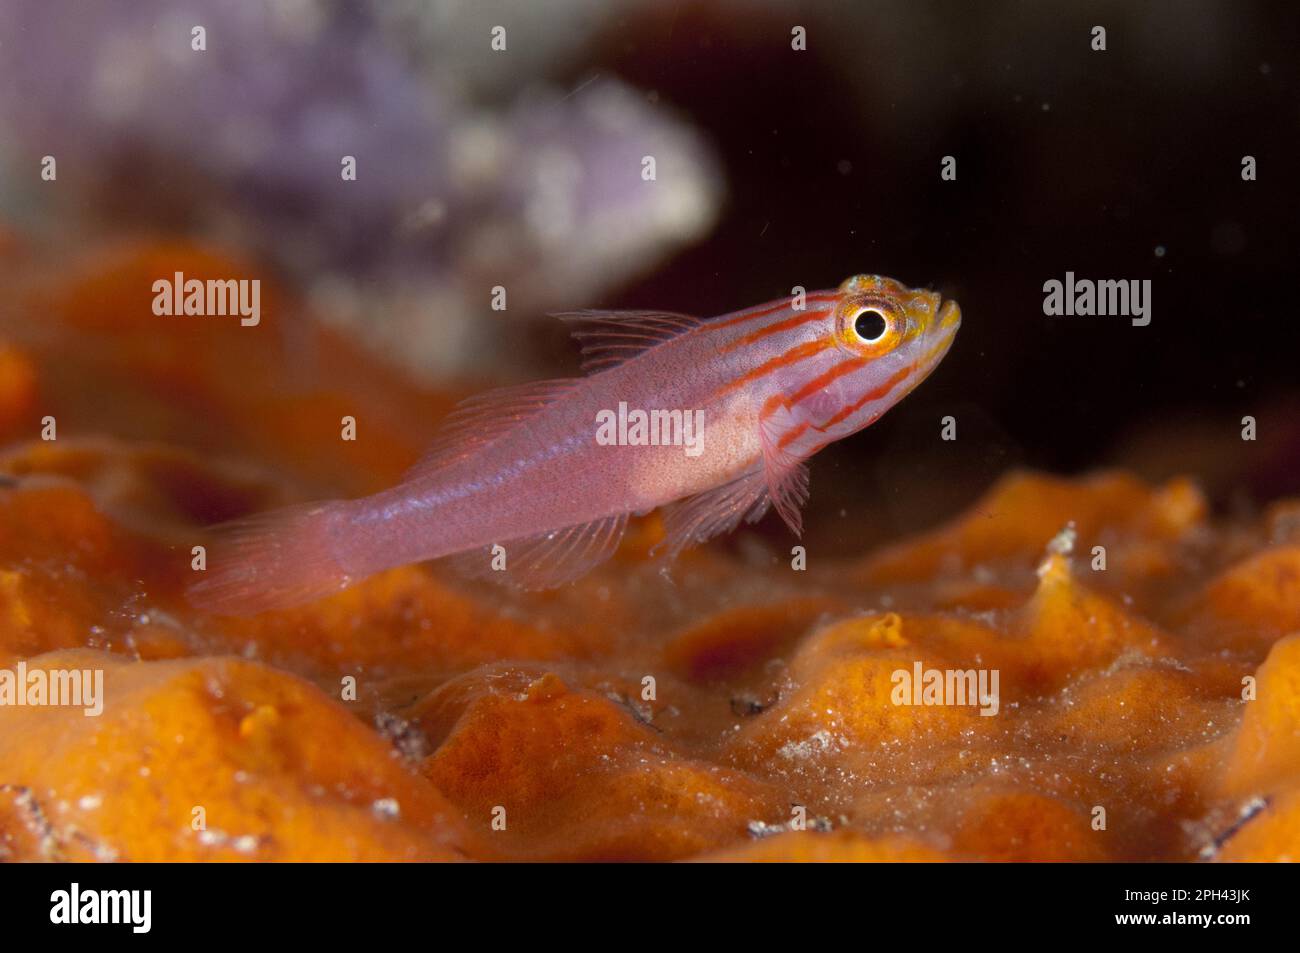 Trimma striata, Head Striped Goby, Head Striped Gobies, Coral Goby, Coral Gobies, Other Animals, Fish, Animals, Gobies, Stripedhead Dwarfgoby (Trimma Stock Photo